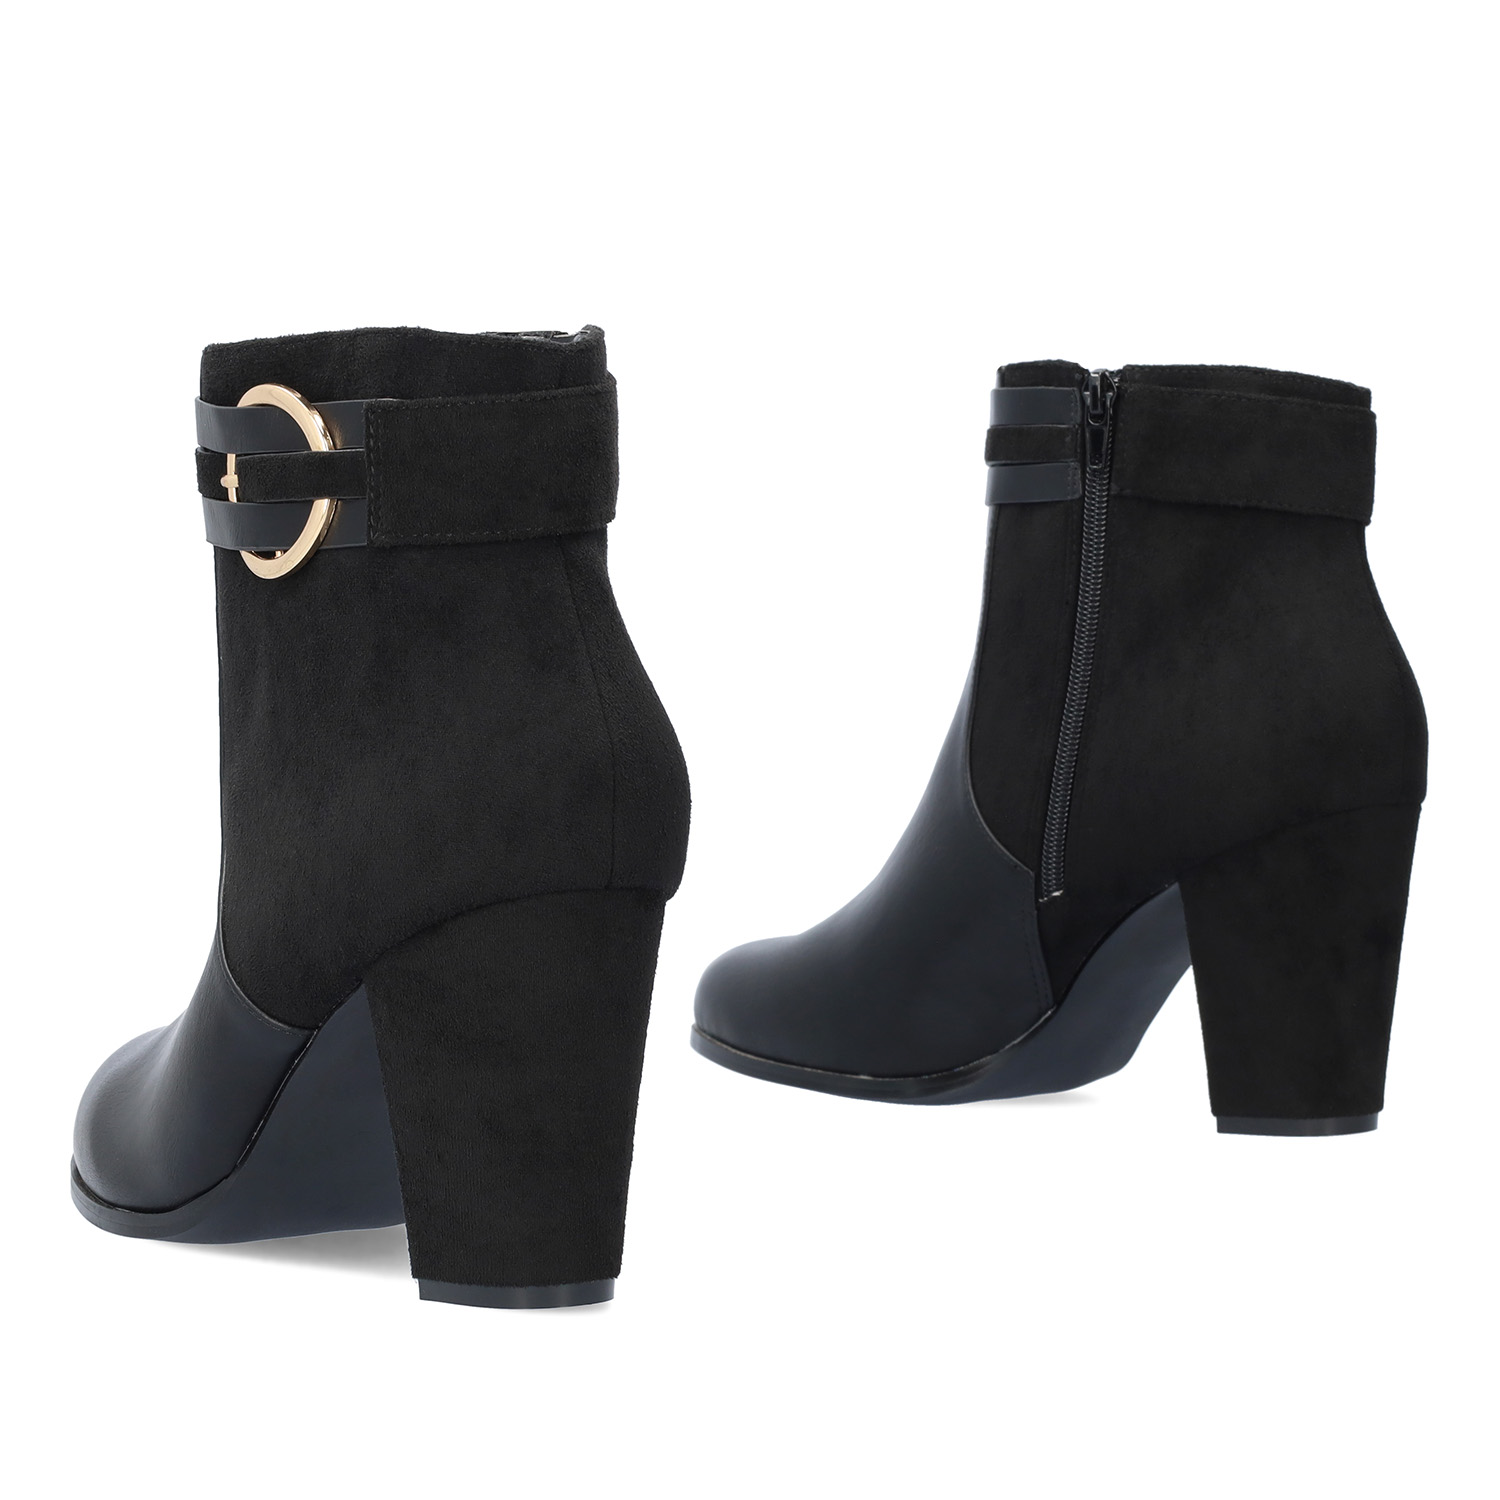 High heeled combined black colour bootie. 